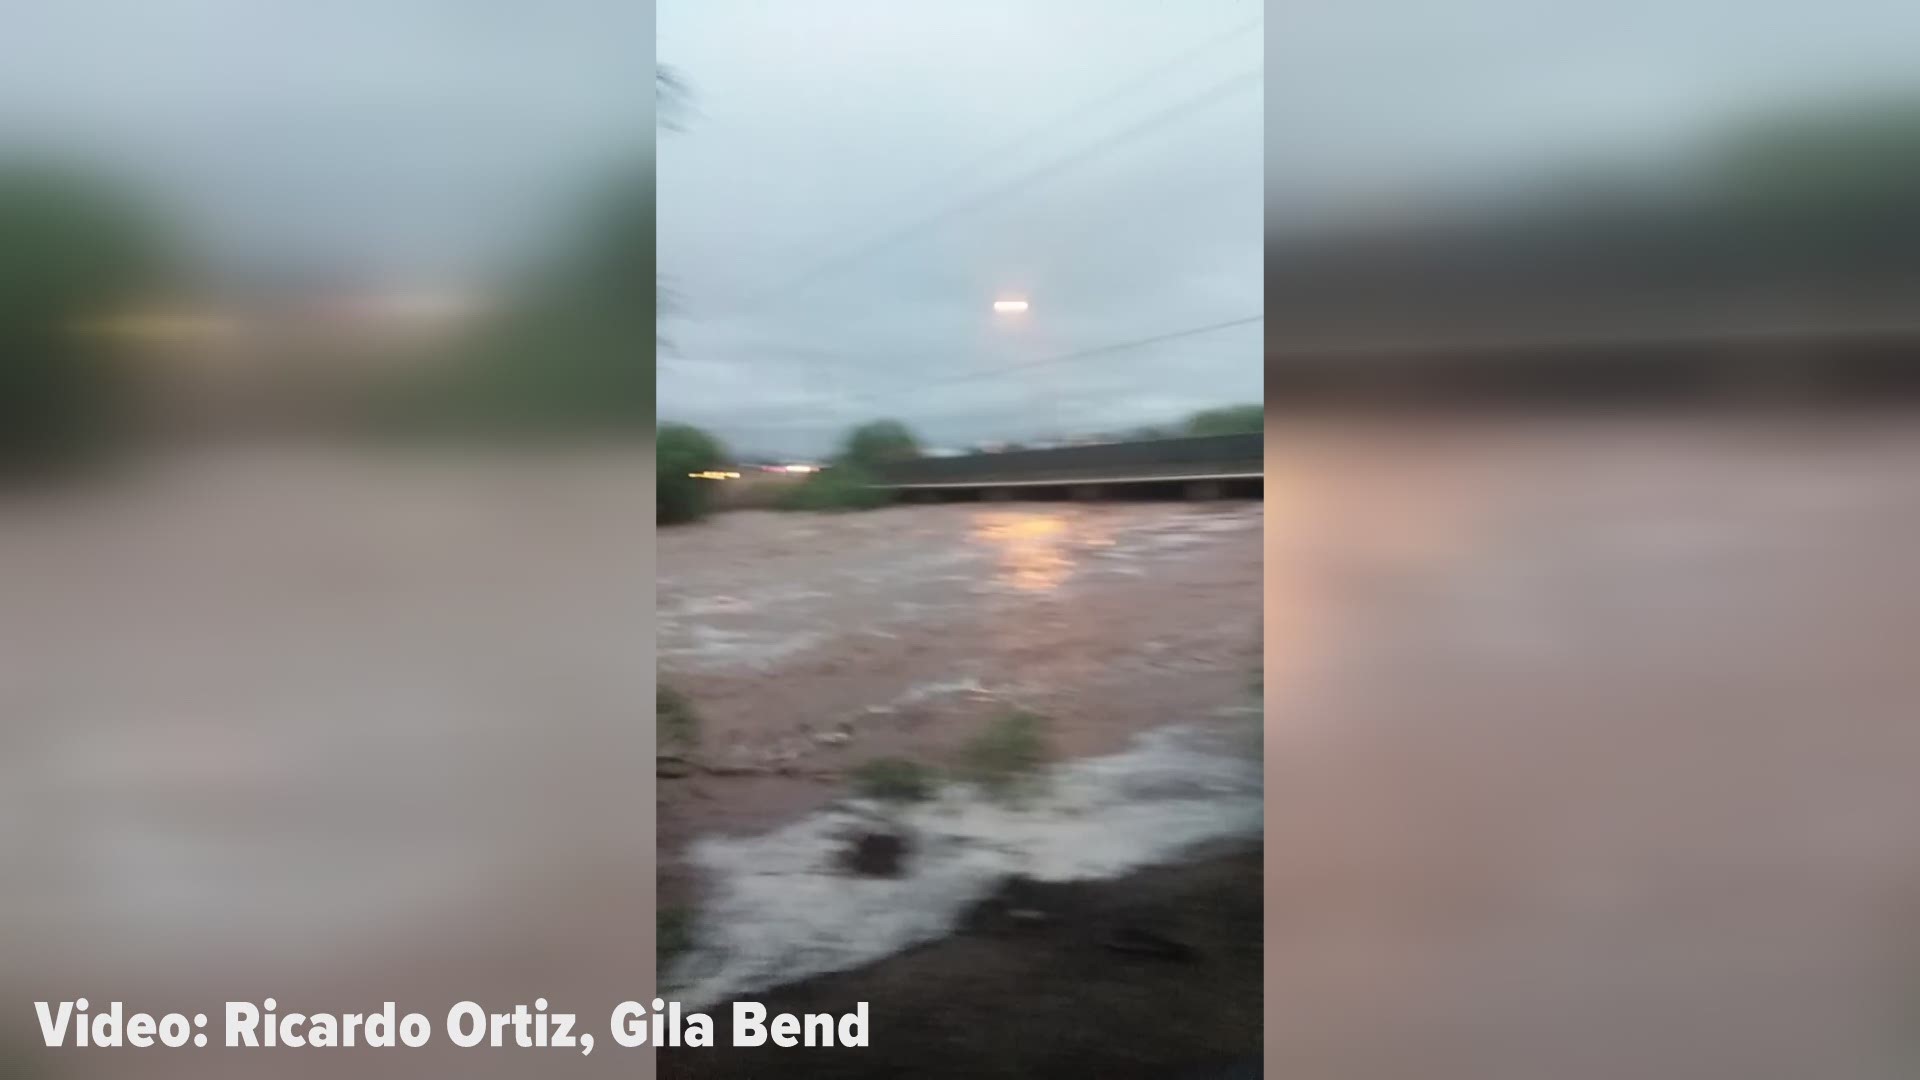 Here are a few videos from 12 News viewers as rain from tropical storm Rosa hit Arizona on Oct. 2, 2018.